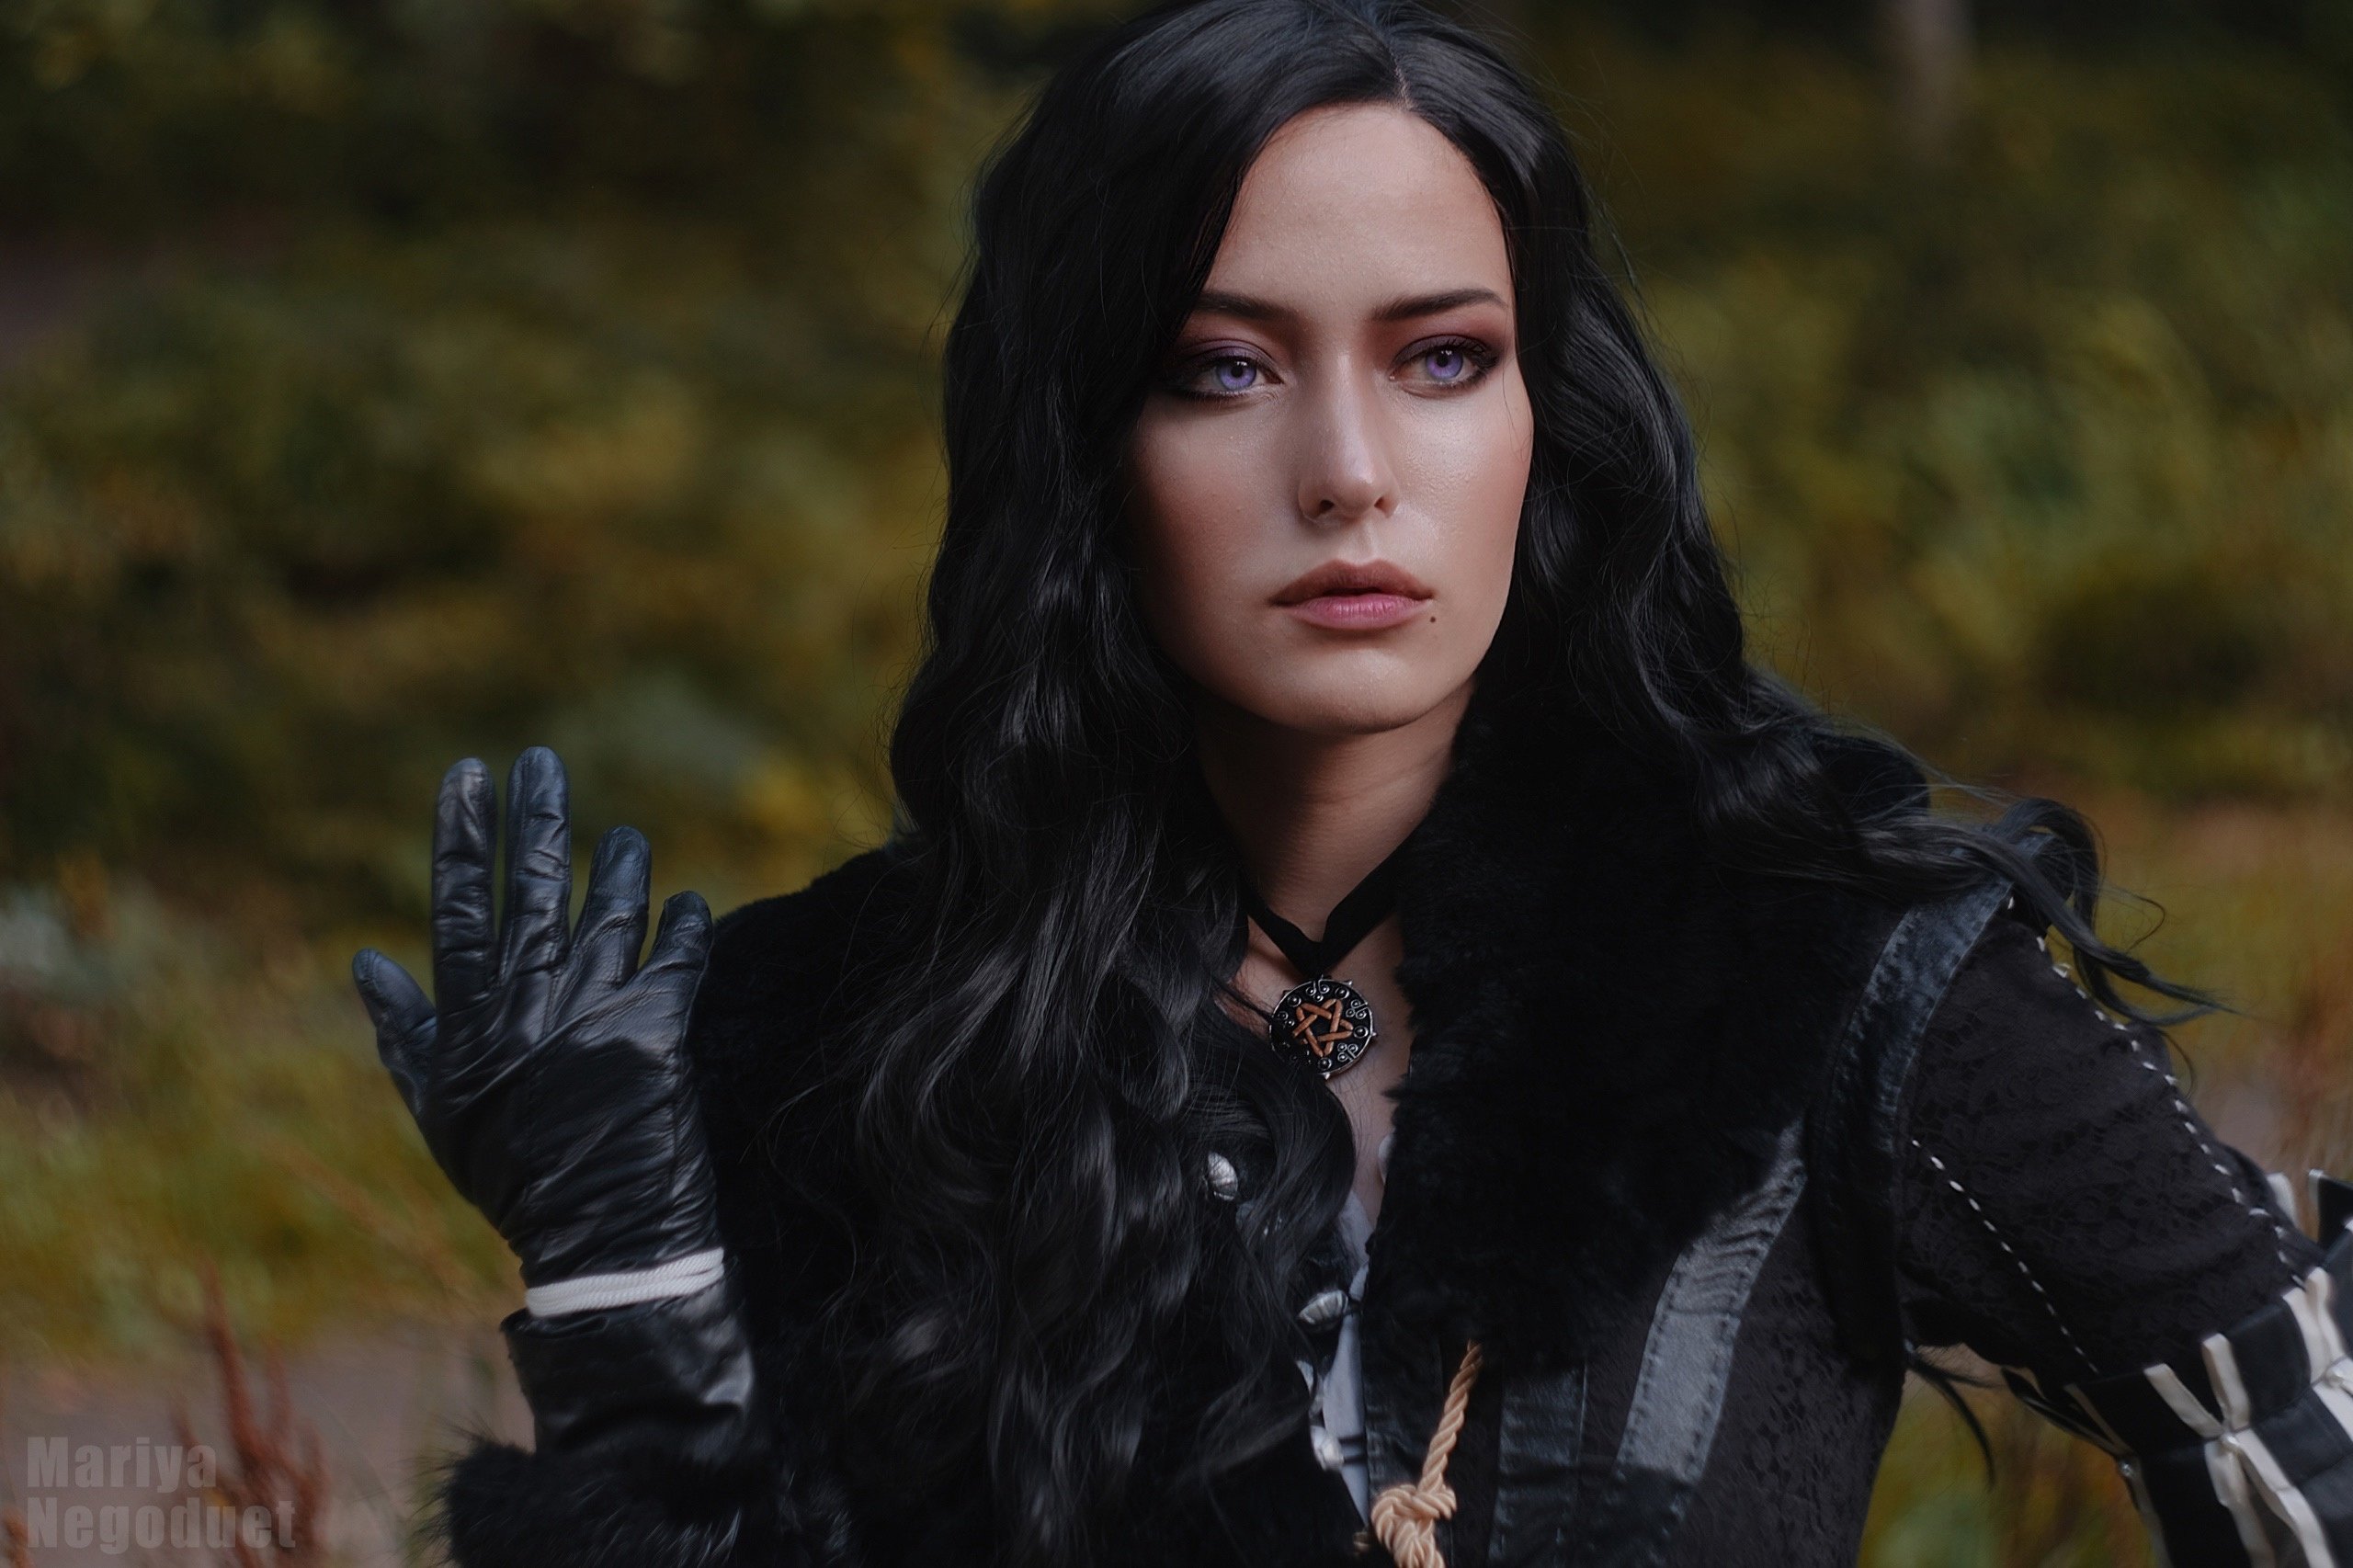 Yennefer of vengerberg the witcher 3 voiced standalone follower se фото 97